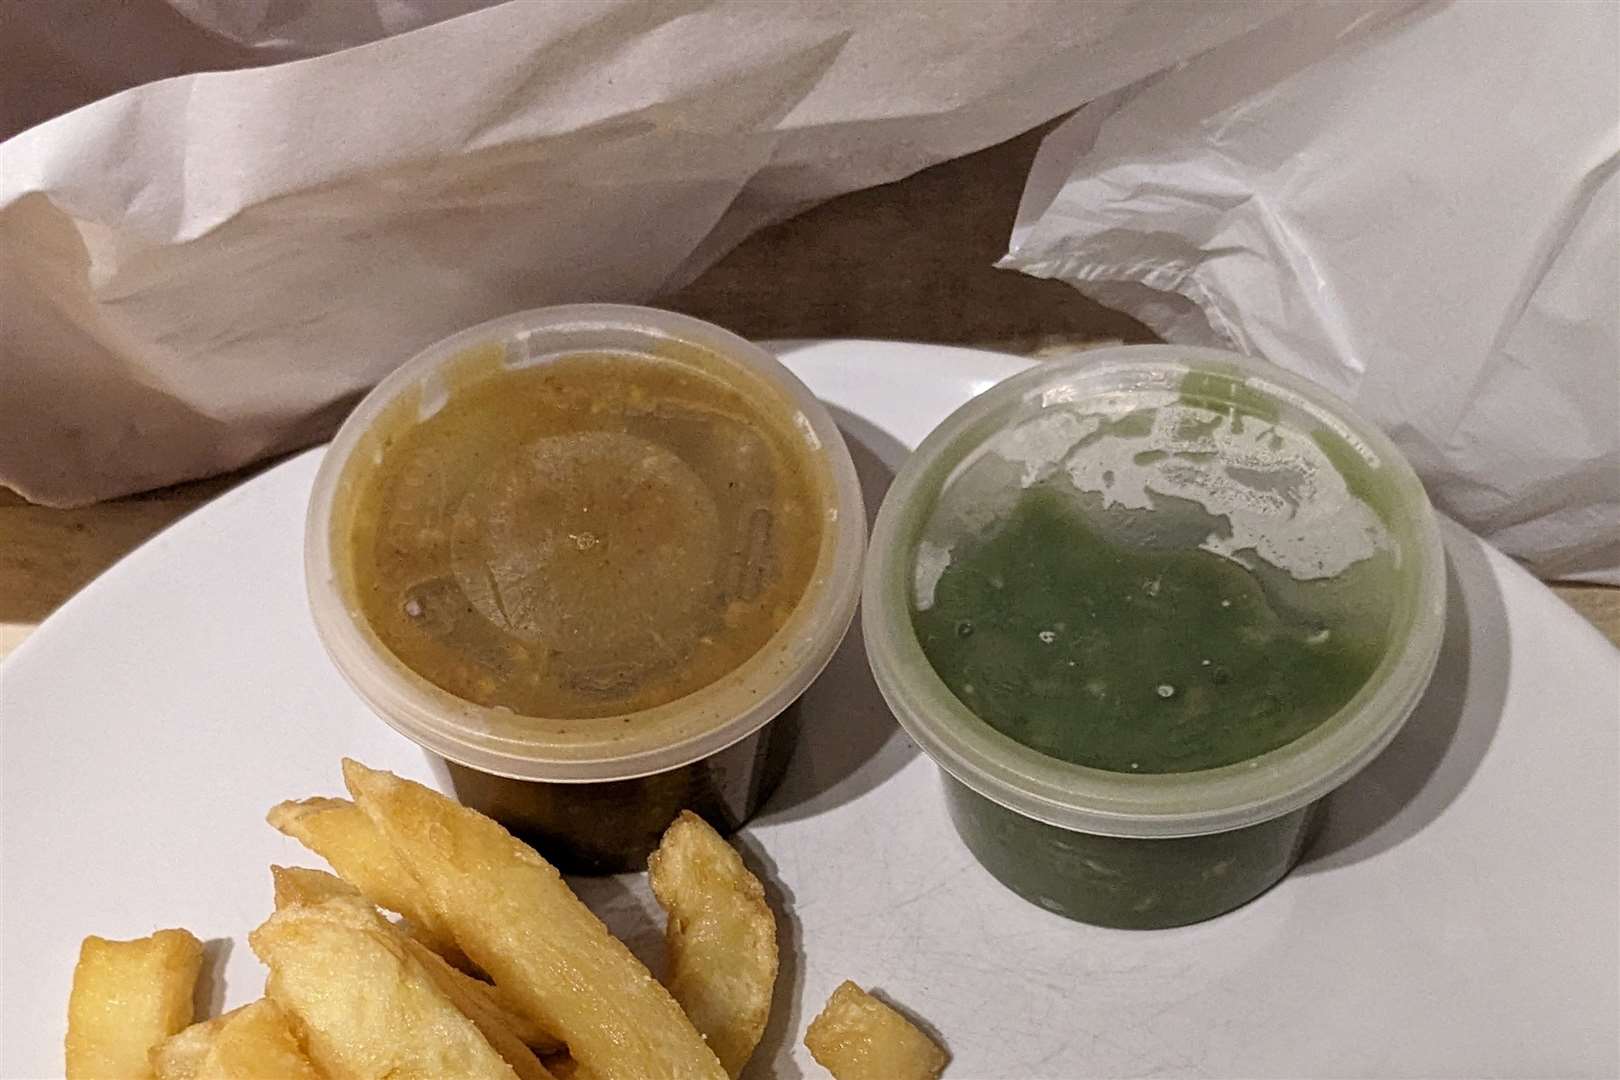 We tried the curry sauce and mushy peas - just like Ed Sheeran. Picture: Suffolk News